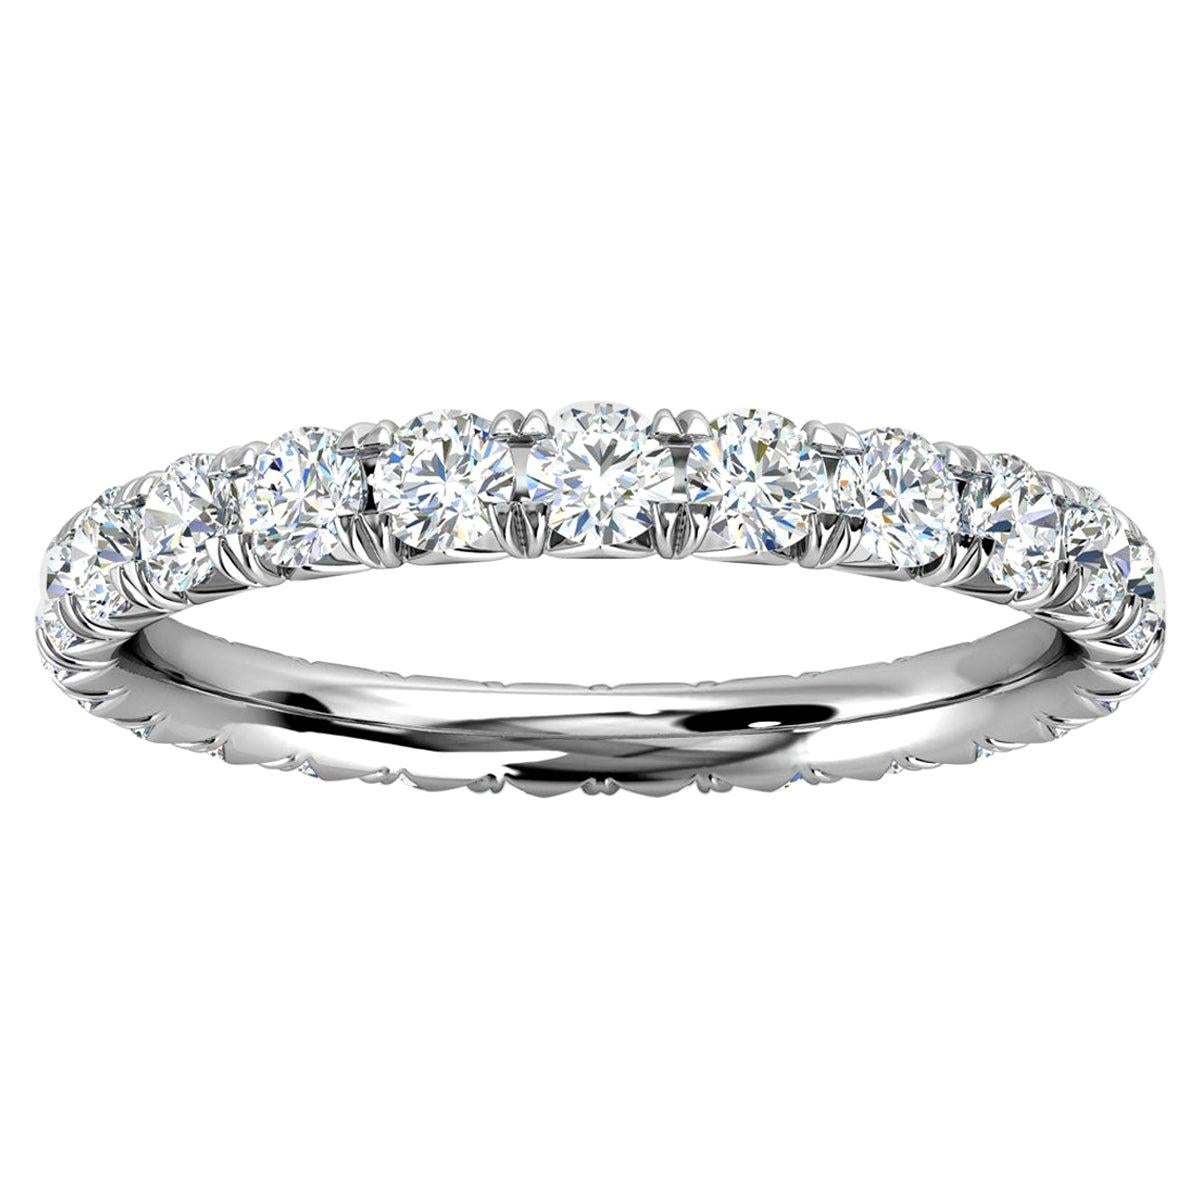 For Sale:  14k White Gold Mia French Pave Diamond Eternity Ring '1 Ct. tw'